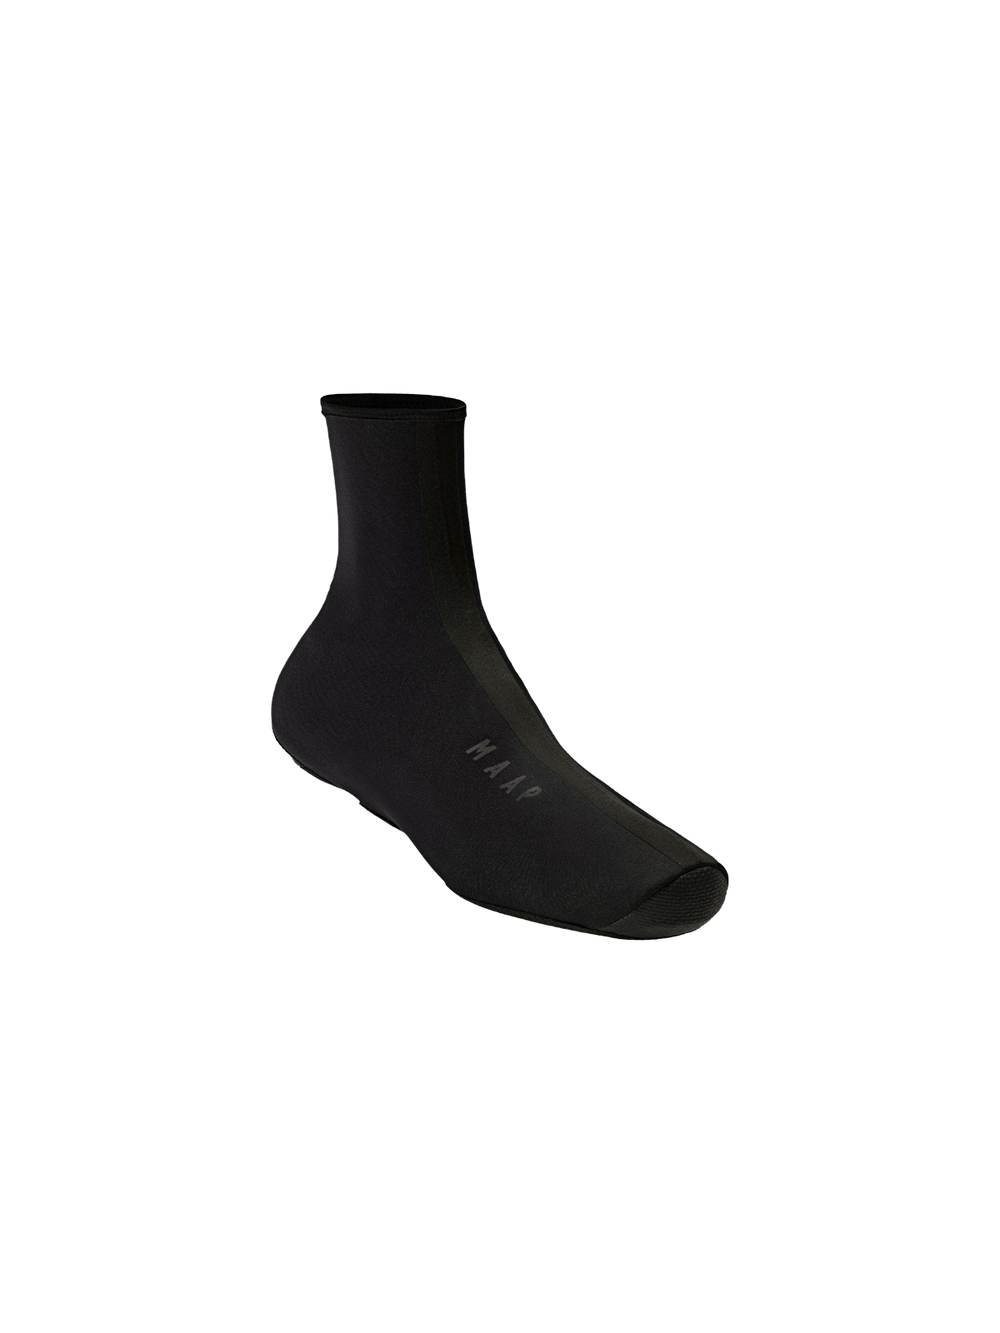 Cycling Overshoes | MAAP